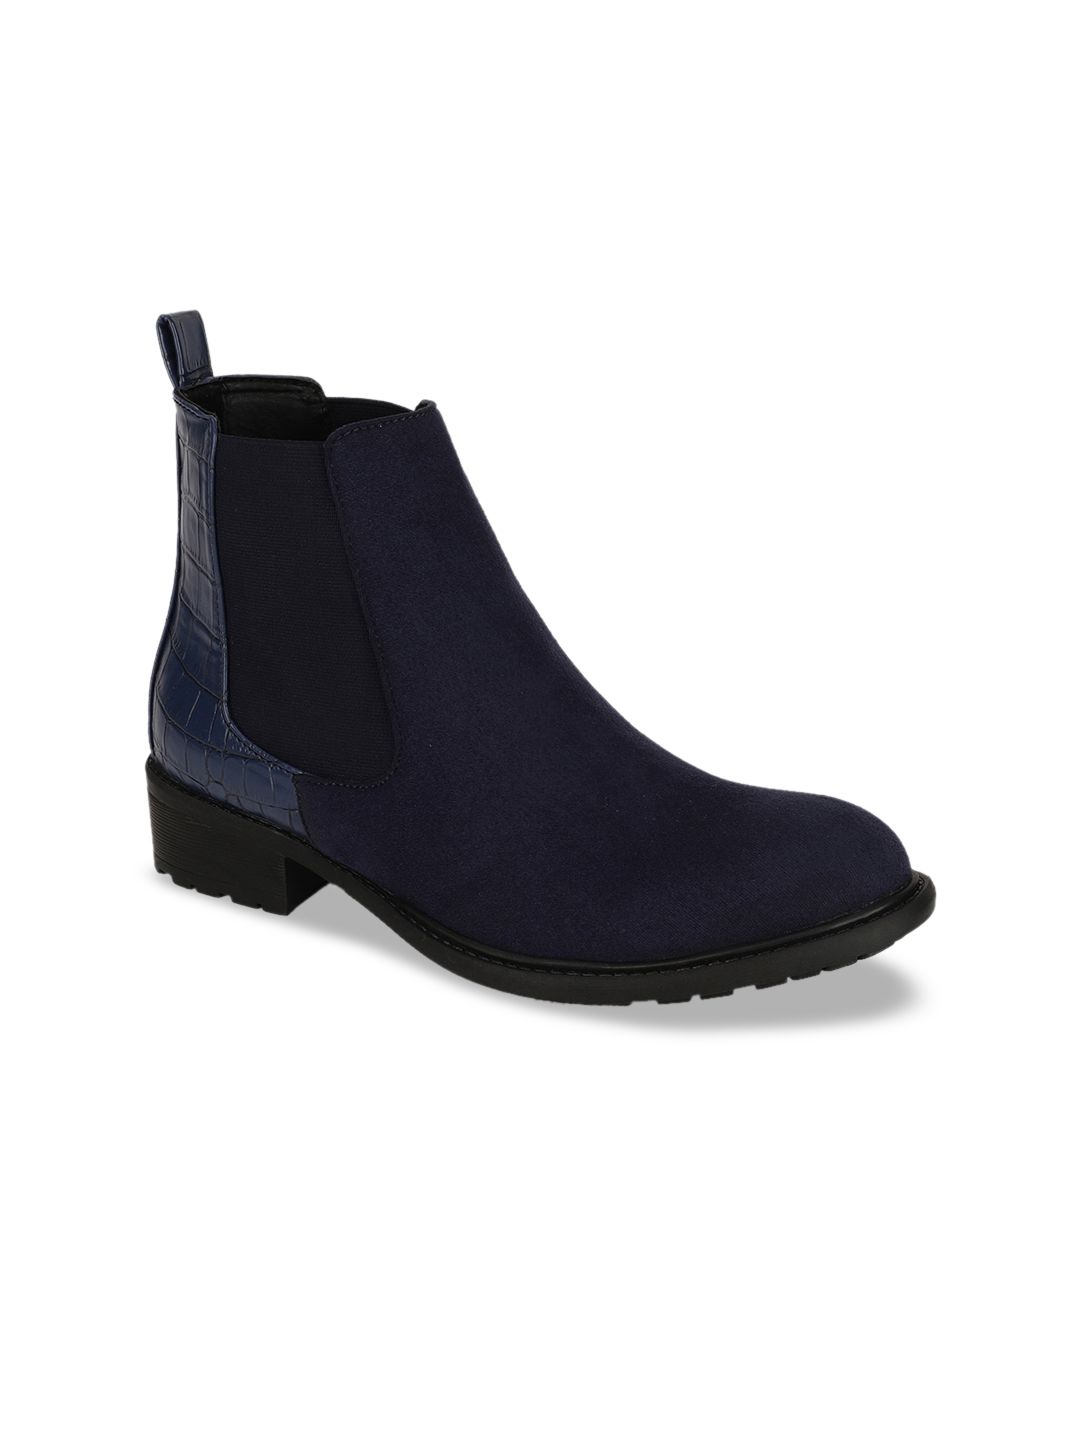 Bruno Manetti Navy Blue Suede Block Heeled Boots Price in India